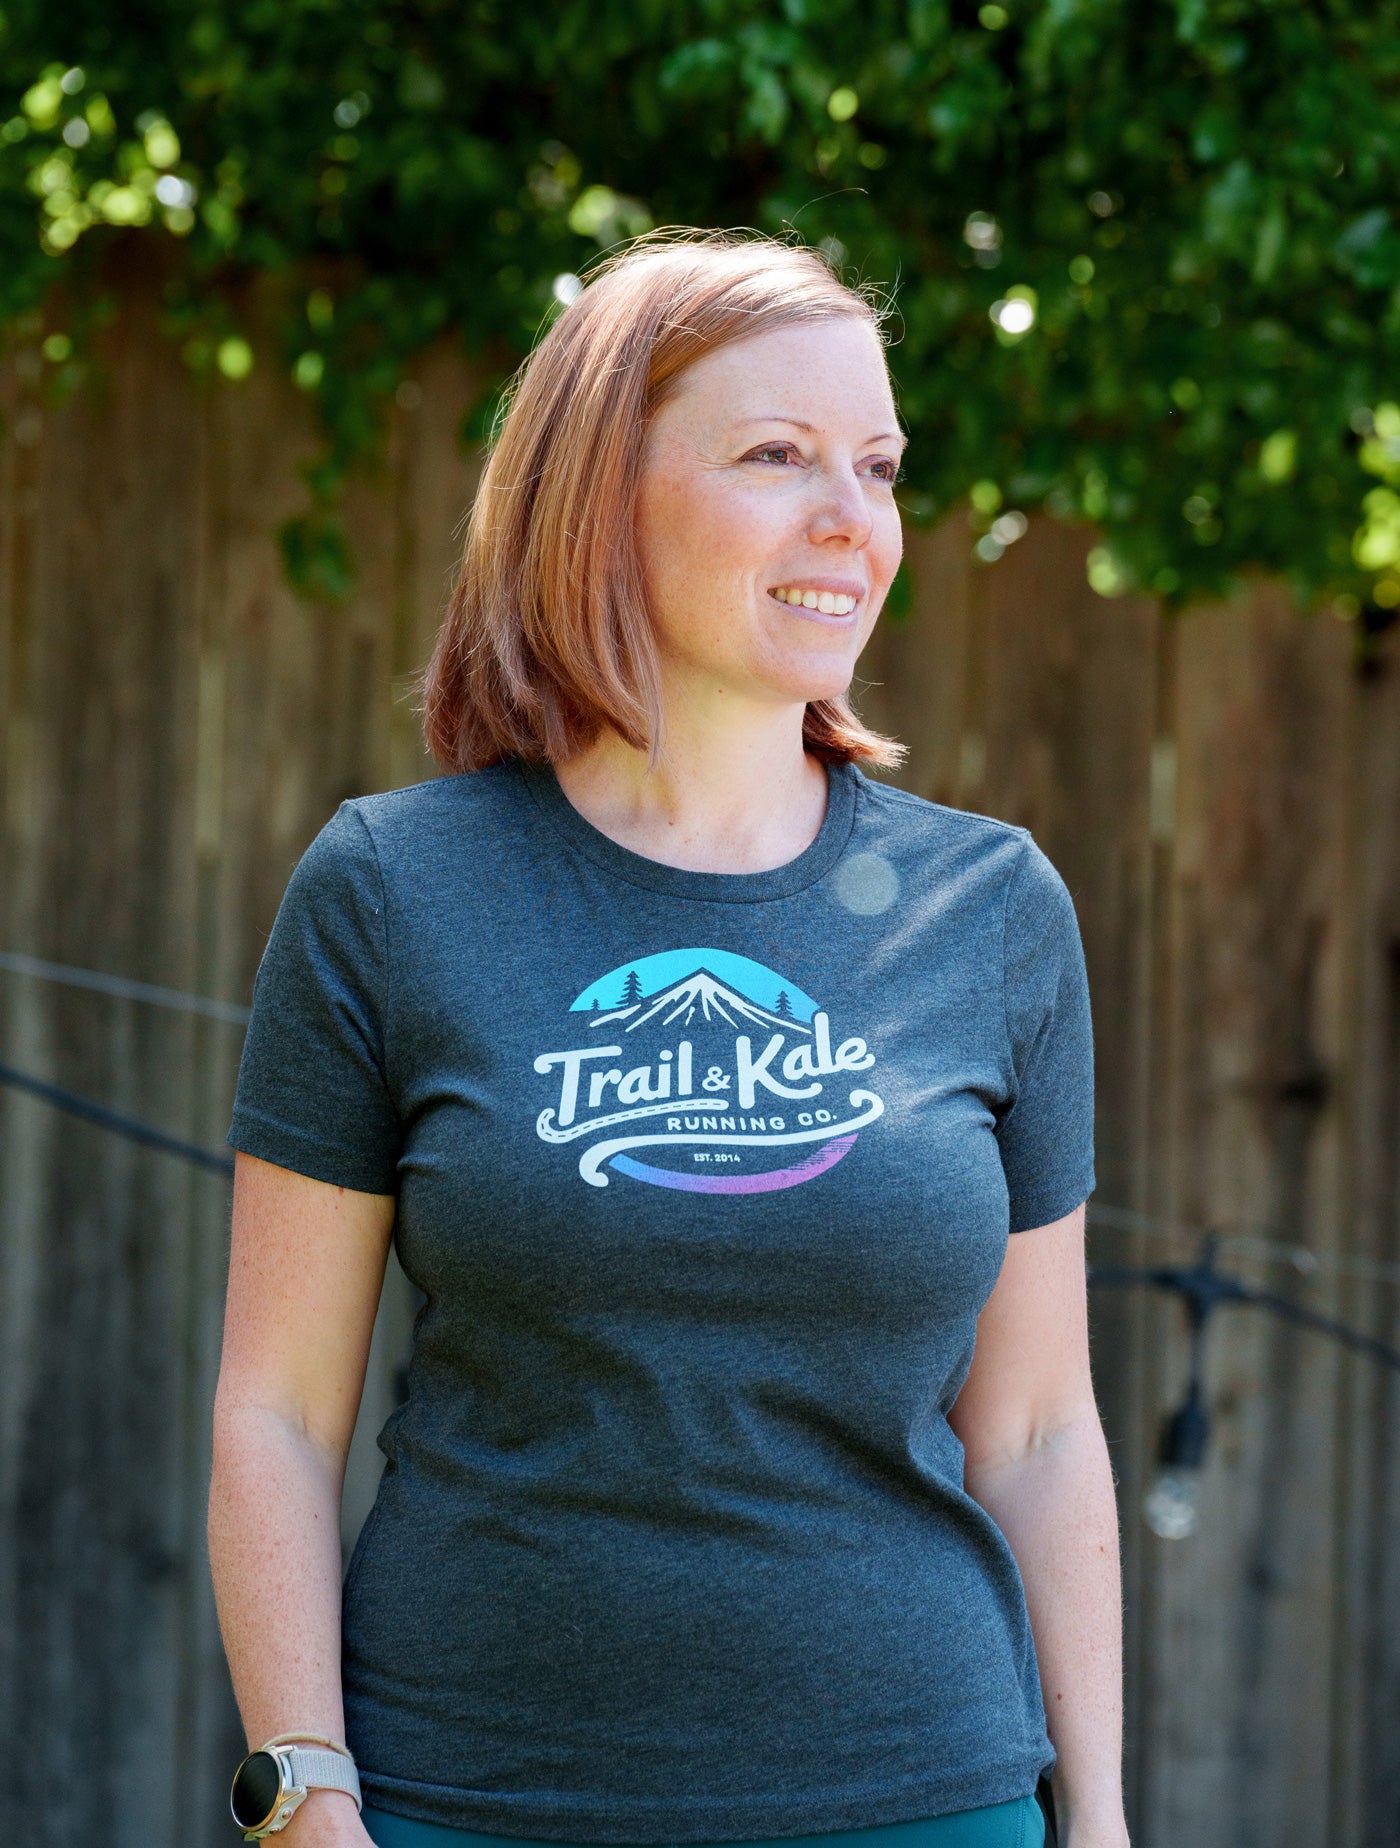 The T&K Women's Classic Tee - Color Fade Edition